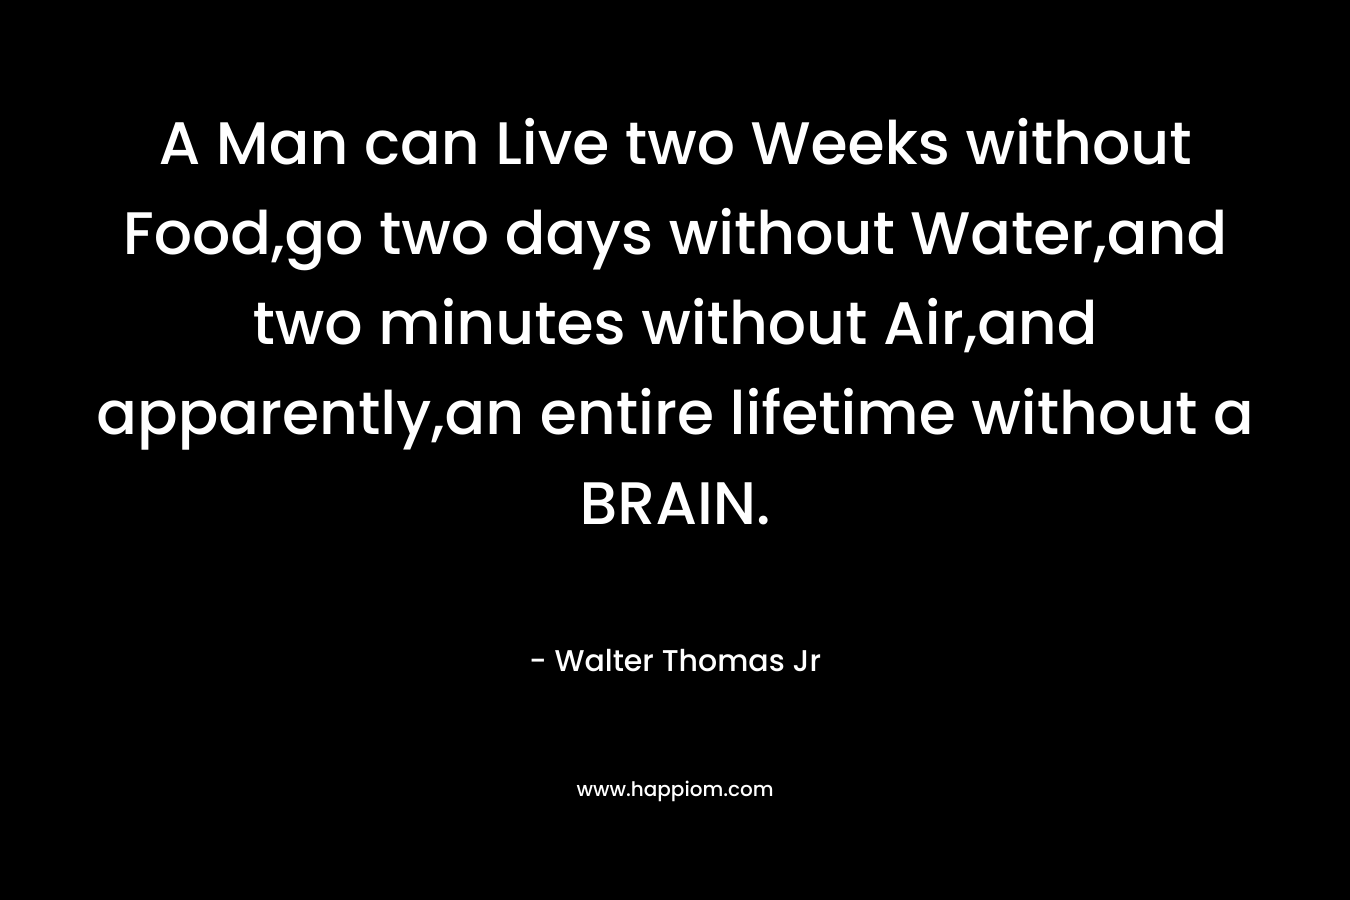 A Man can Live two Weeks without Food,go two days without Water,and two minutes without Air,and apparently,an entire lifetime without a BRAIN. – Walter Thomas Jr